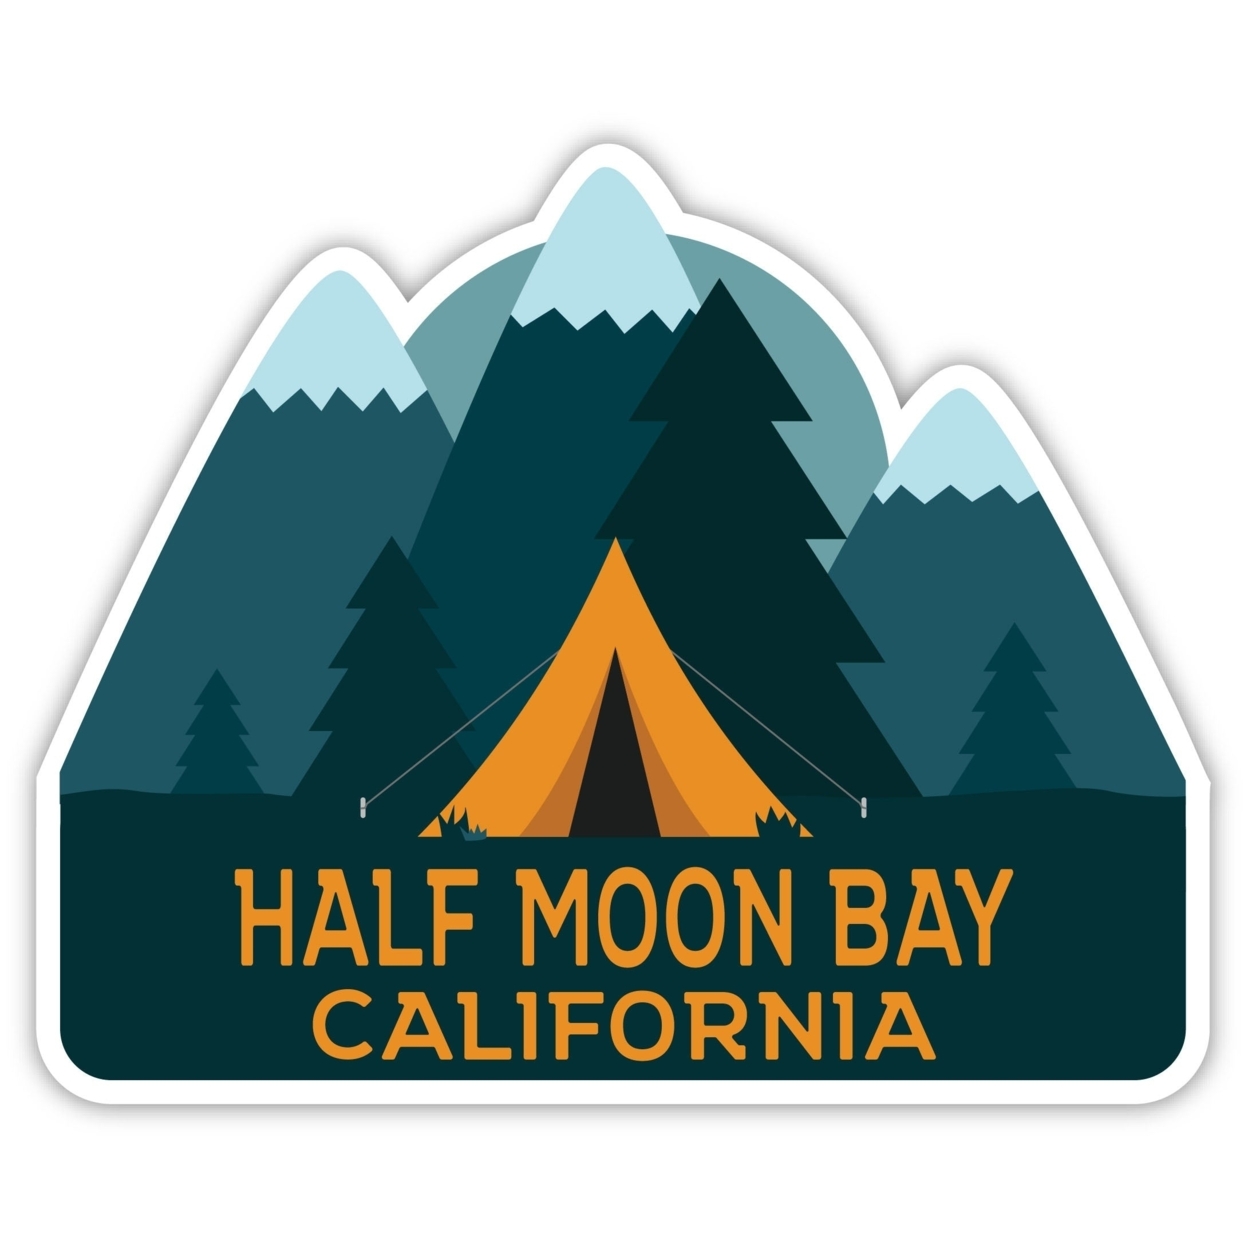 Half Moon Bay California Souvenir Decorative Stickers (Choose Theme And Size) - 4-Pack, 12-Inch, Tent